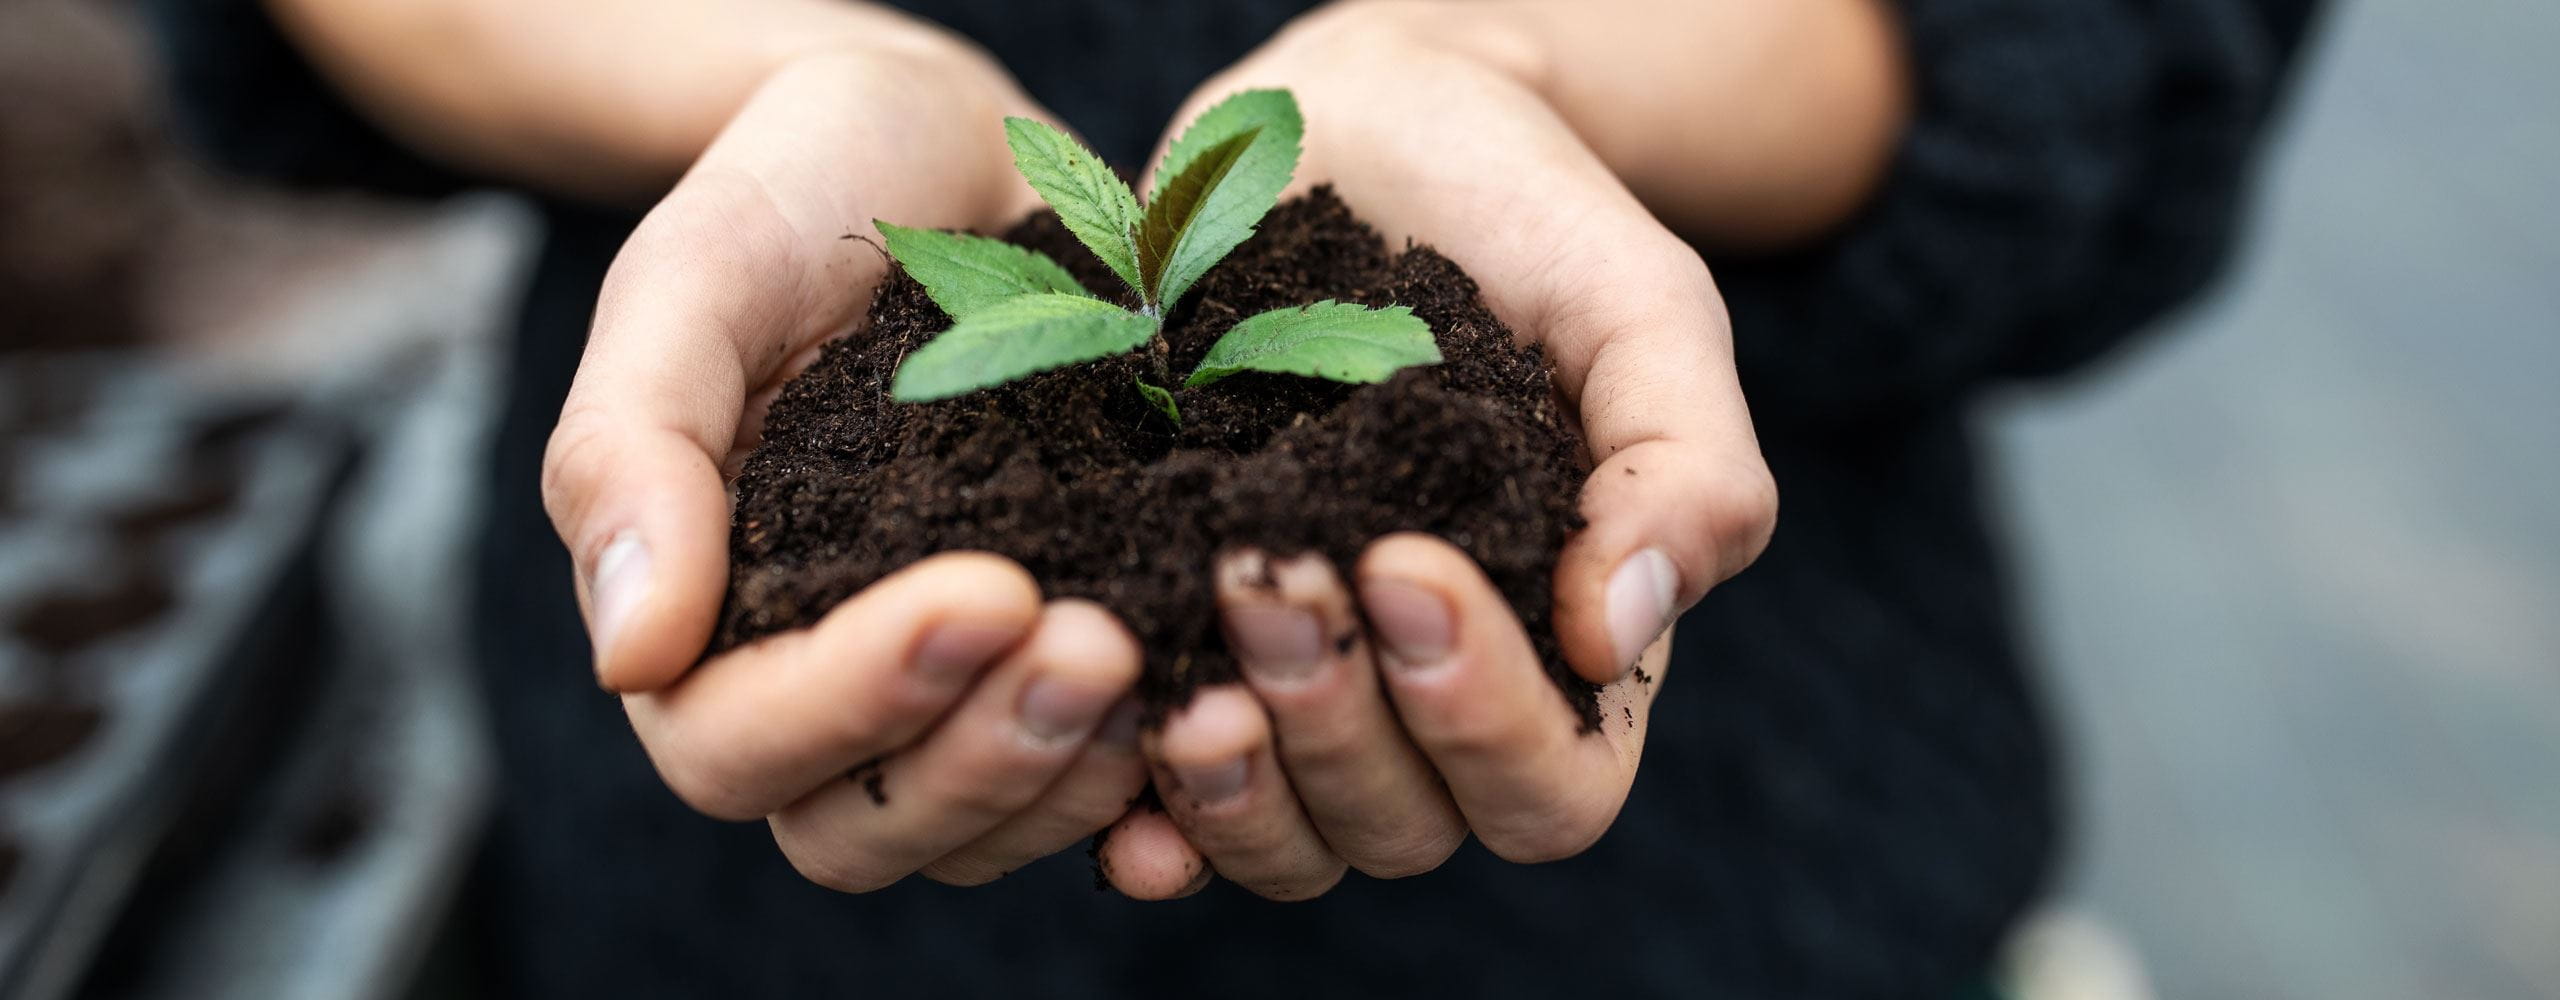 hands holding a plant in soil